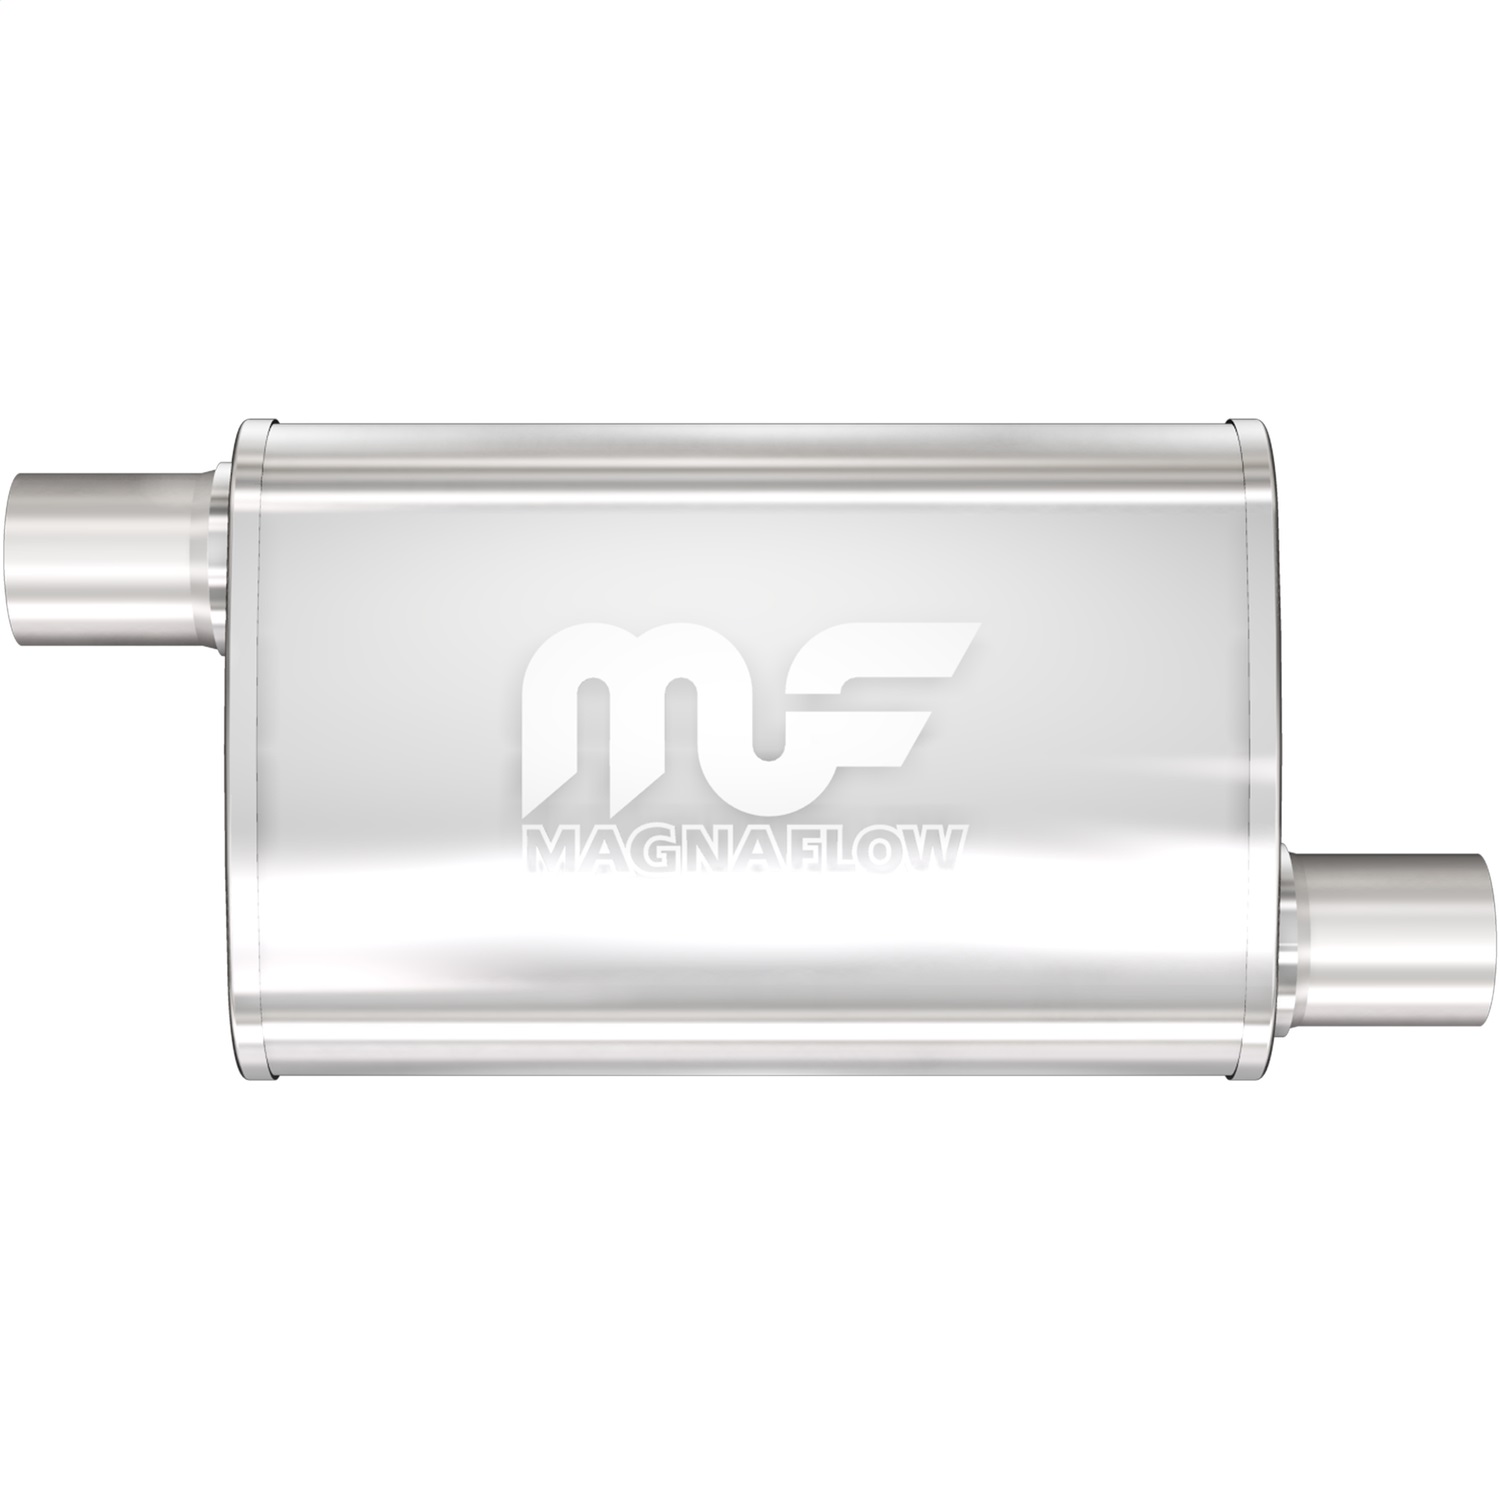 MagnaFlow Exhaust Products Magnaflow Performance Exhaust 11235 Stainless Steel Muffler